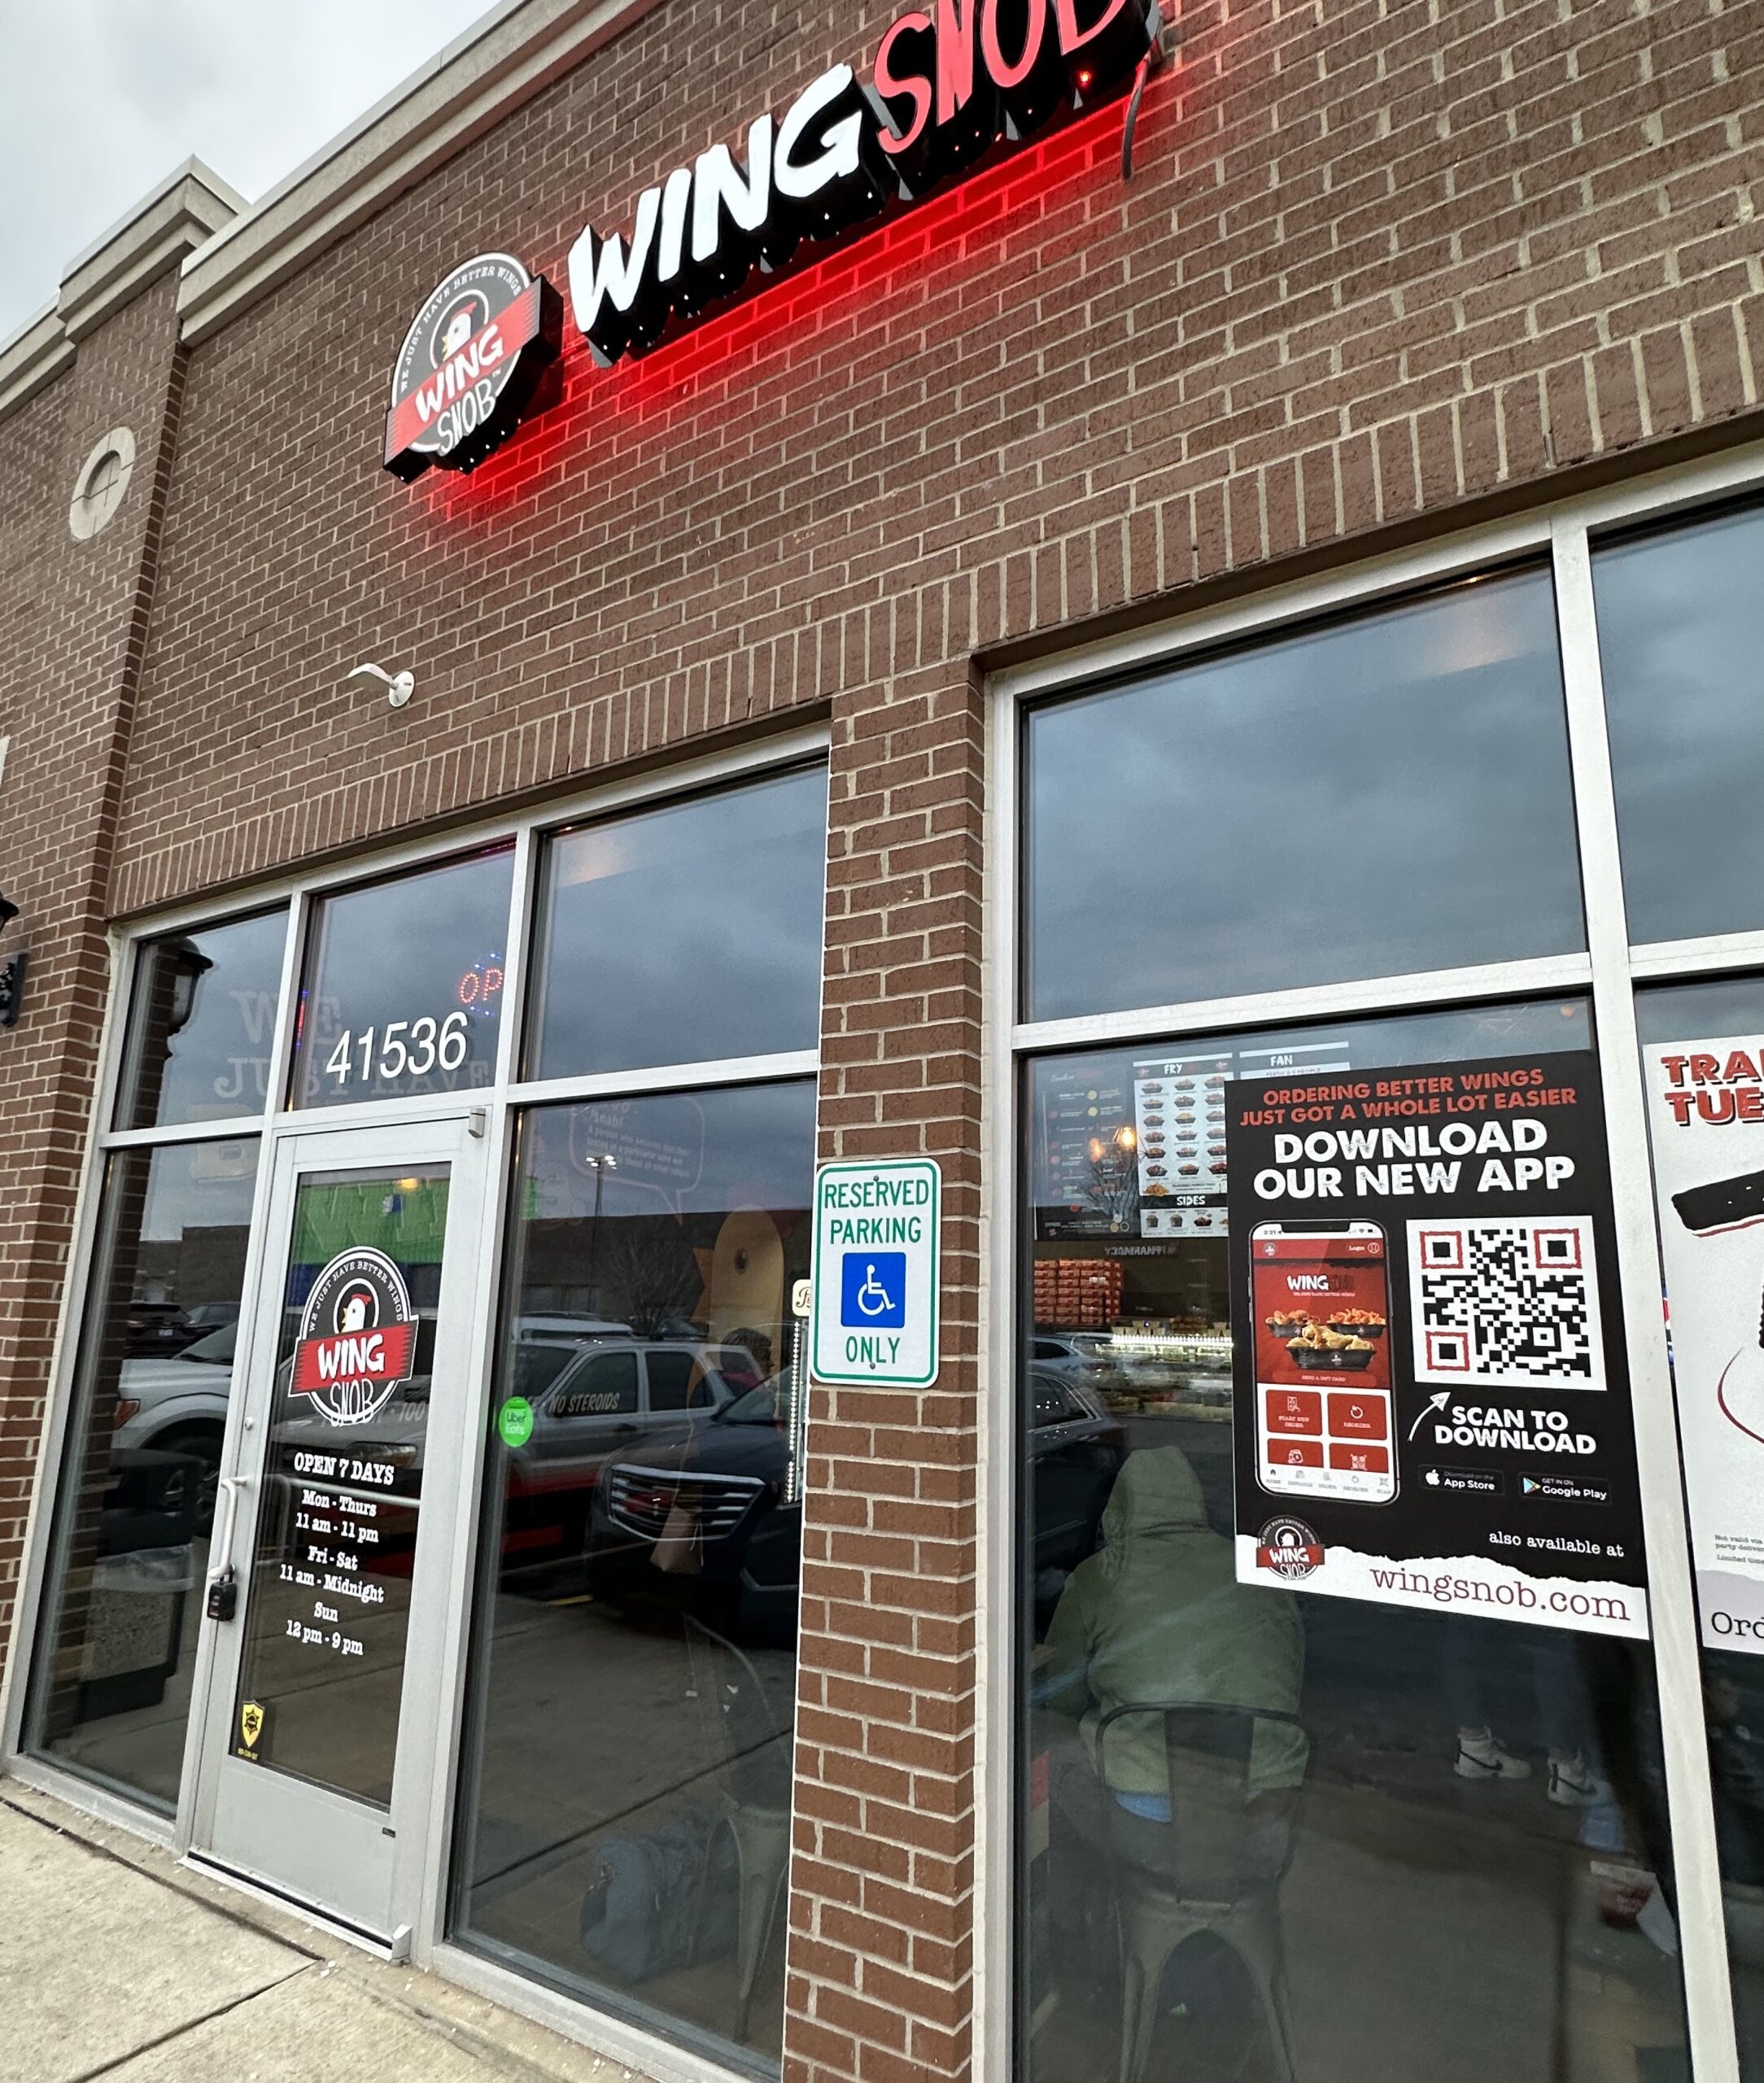 Wing Snob is located at 41536 Ann Arbor Road in Plymouth Township.